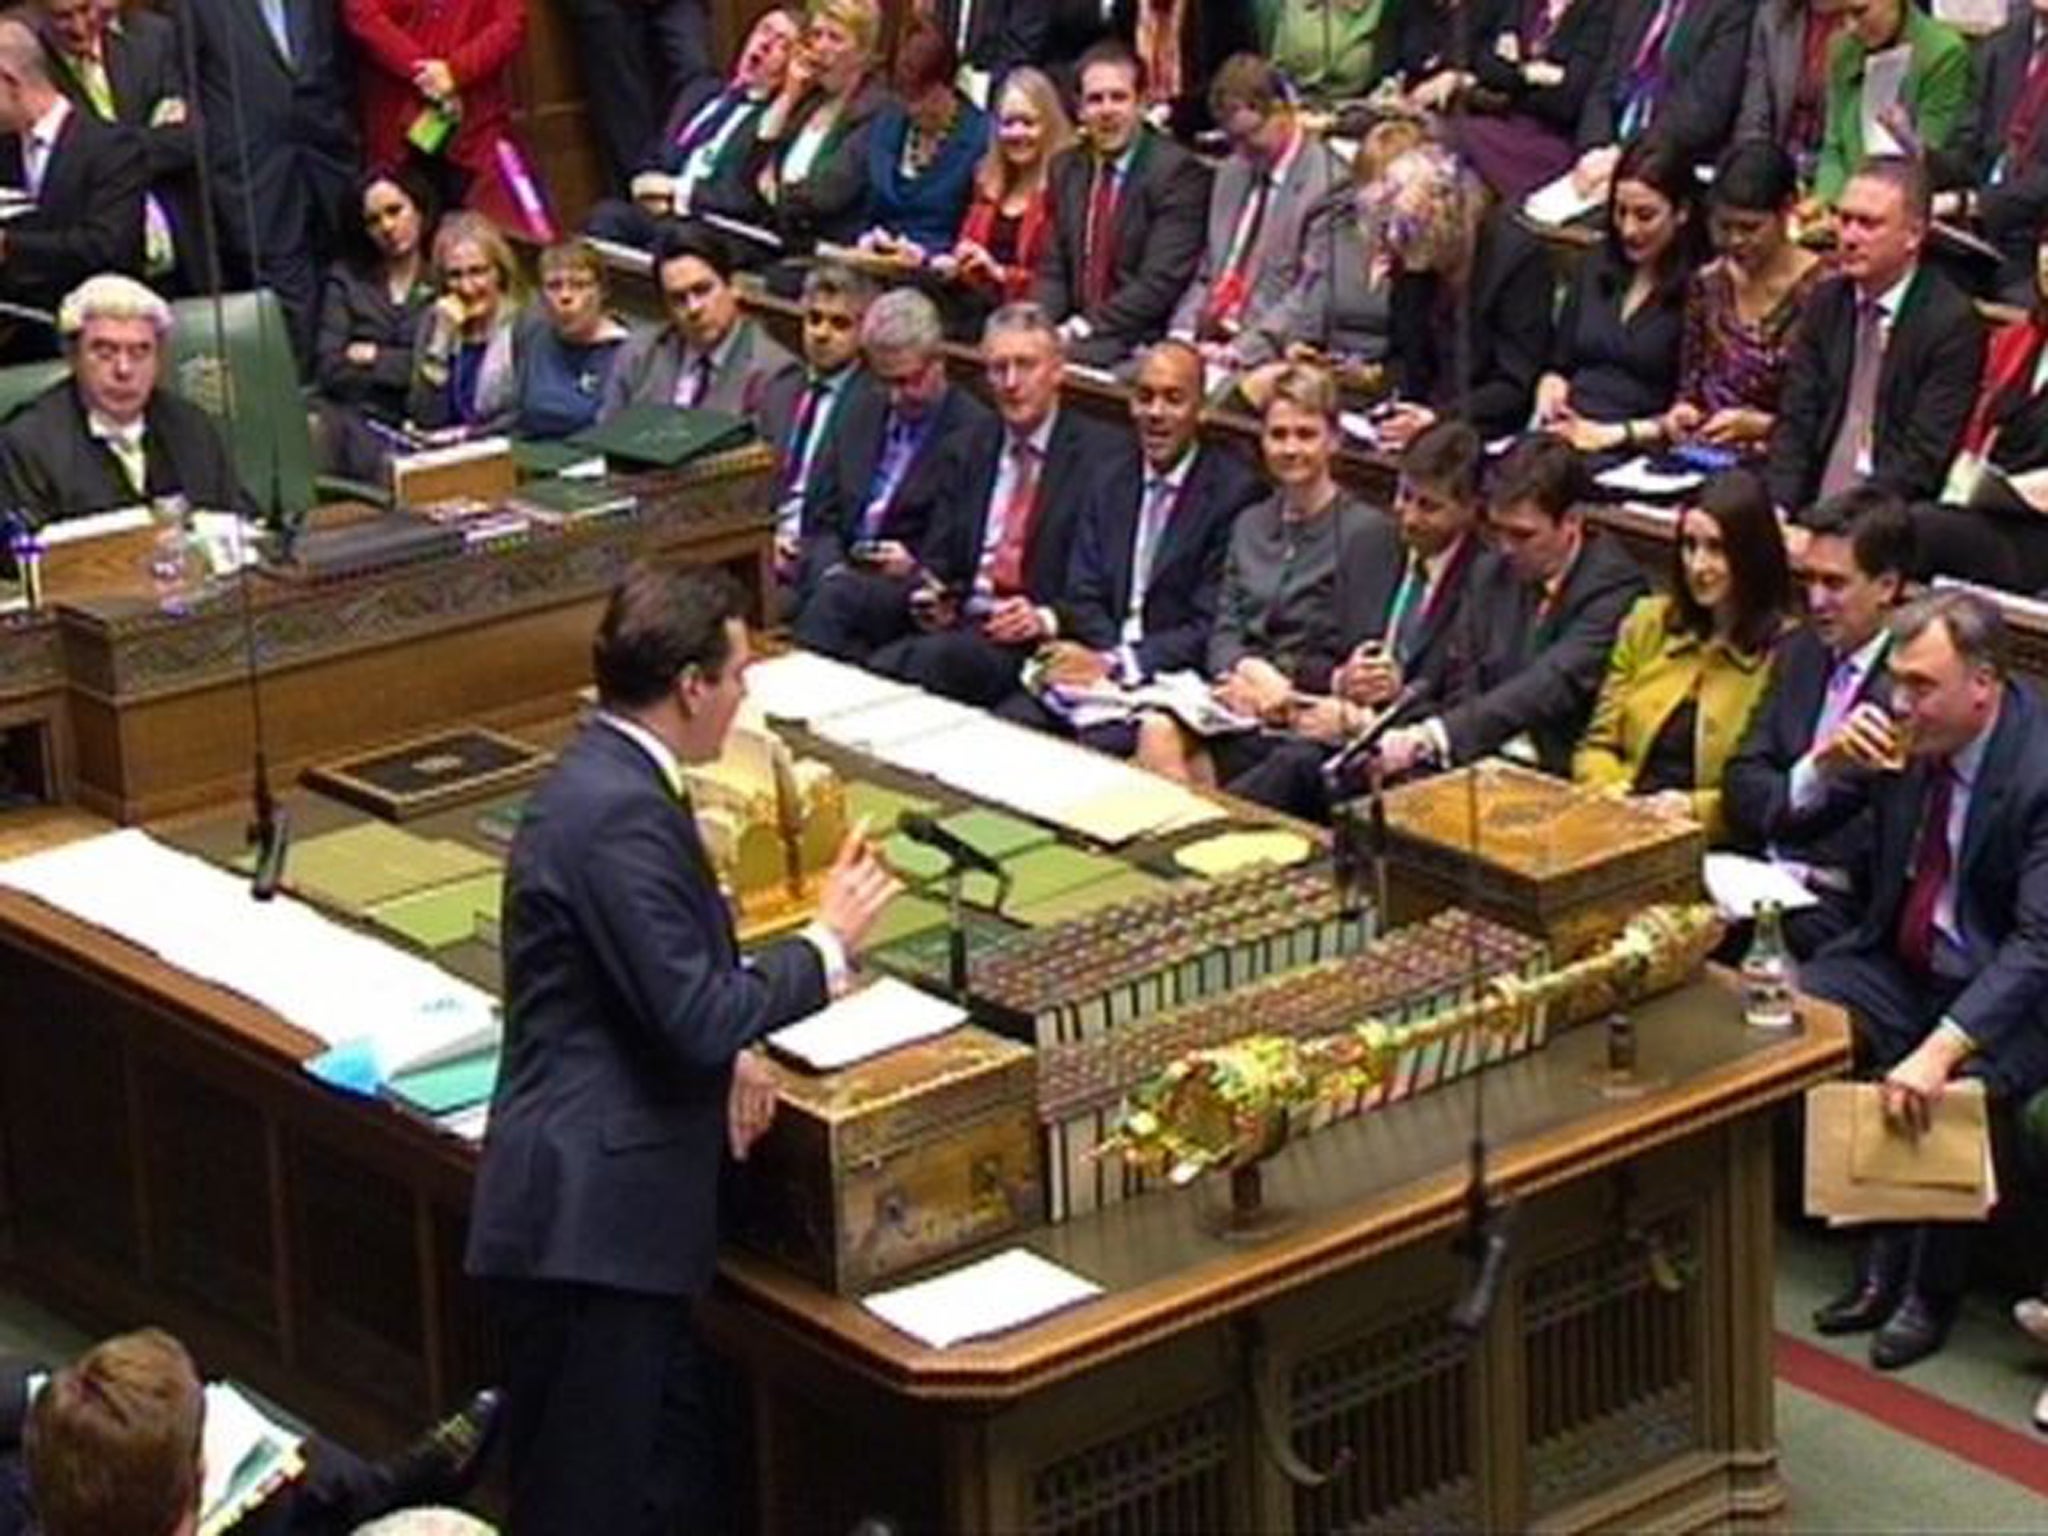 Chancellor of the Exchequer Georger Osborne delivers his Autumn Statement to MPs in the House of Commons